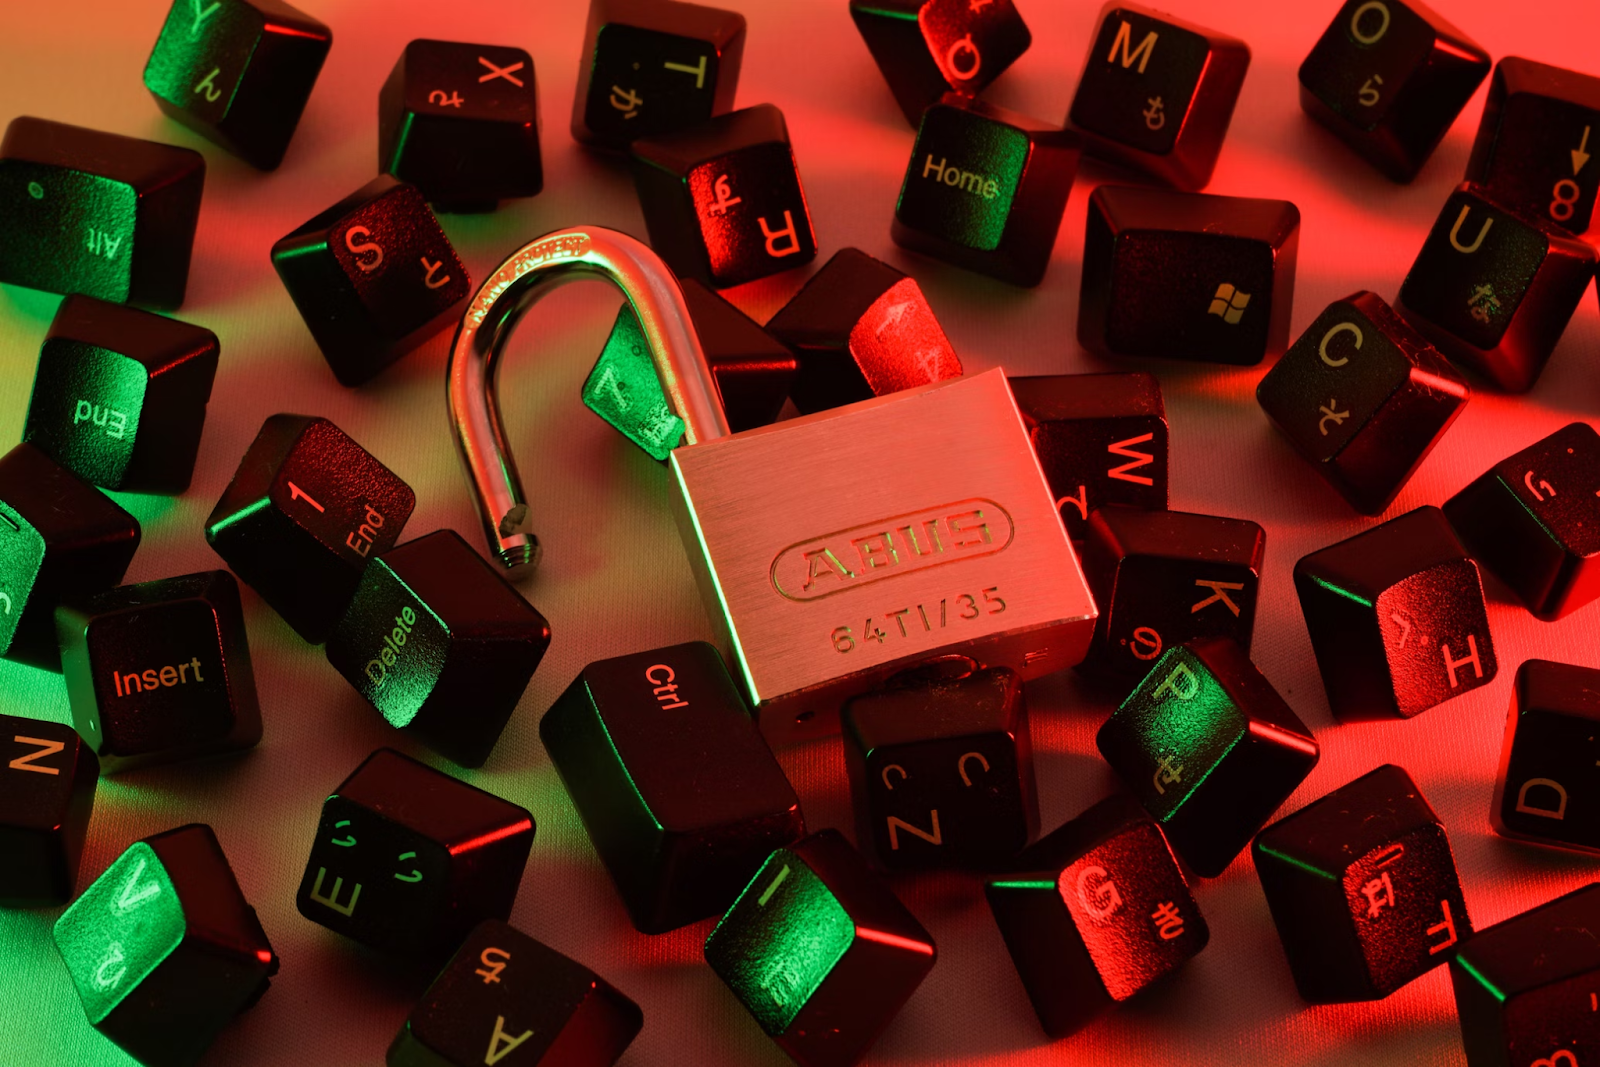 Red and black keyboard keycaps with a stainless steel padlock placed on top